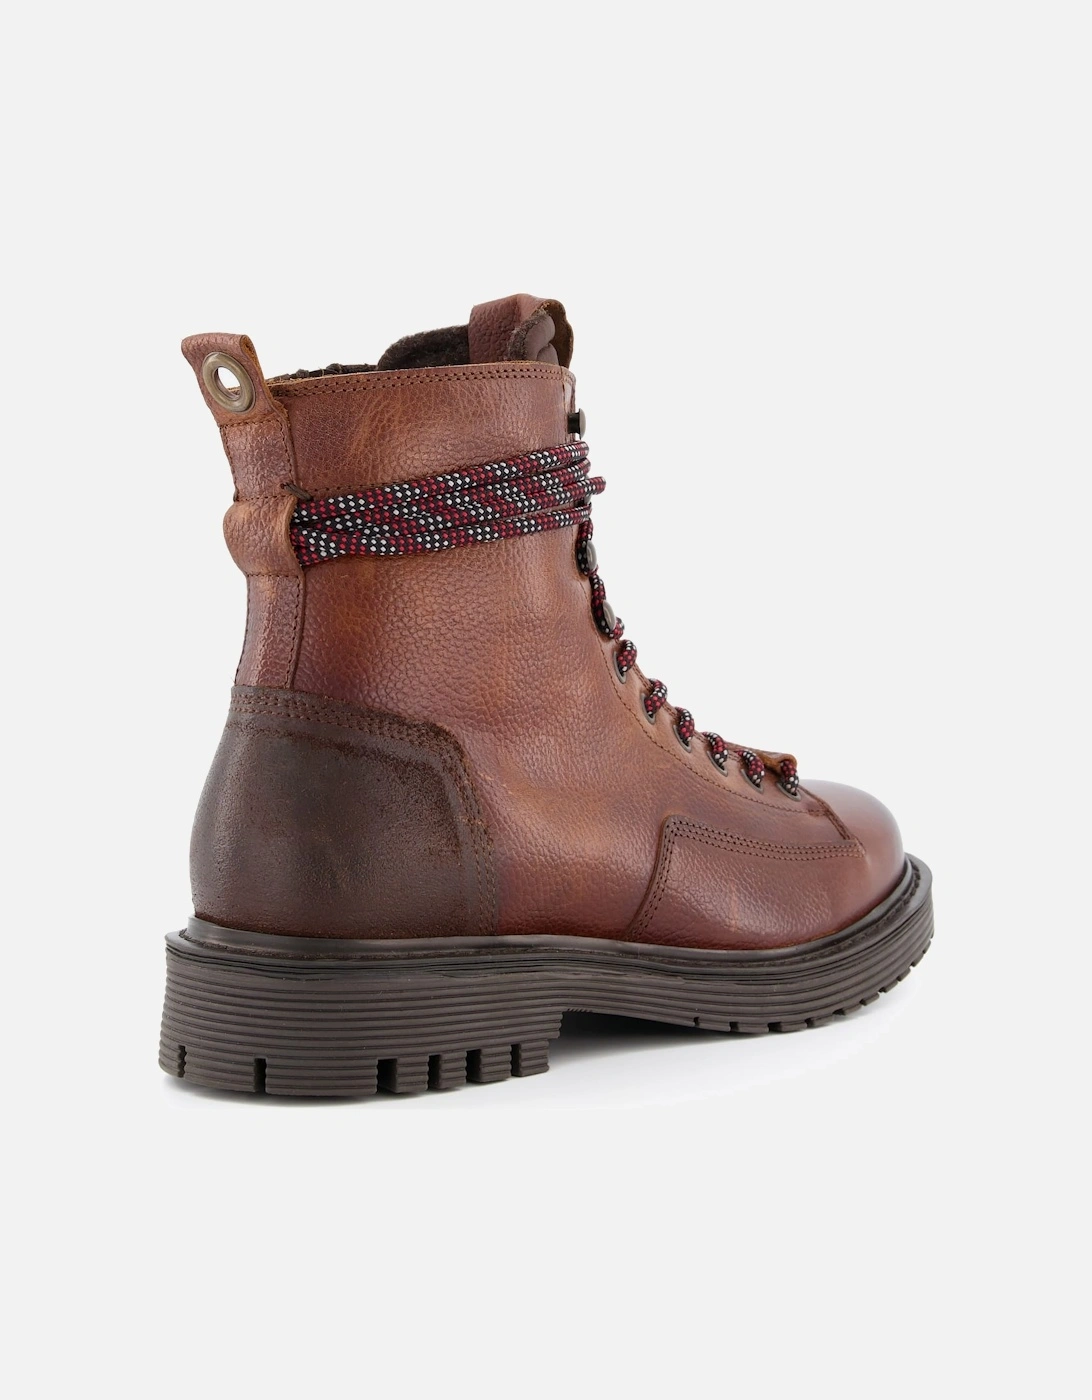 Mens Chasers - Chunky Lace-Up Ankle Boots